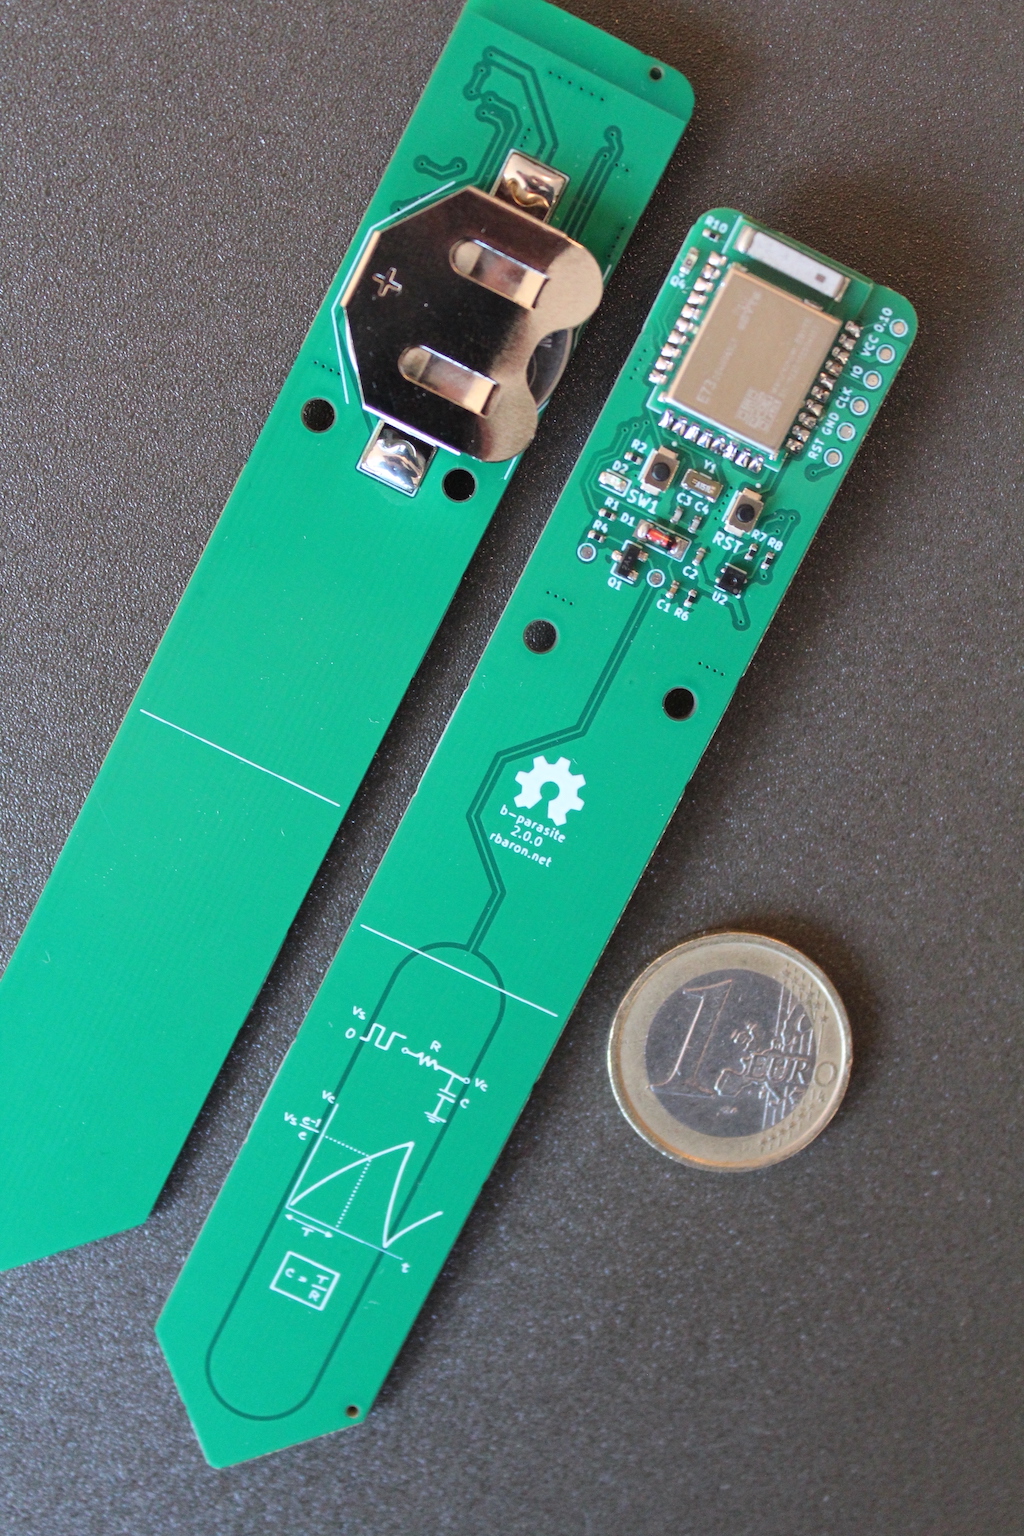 PCB front and back photo